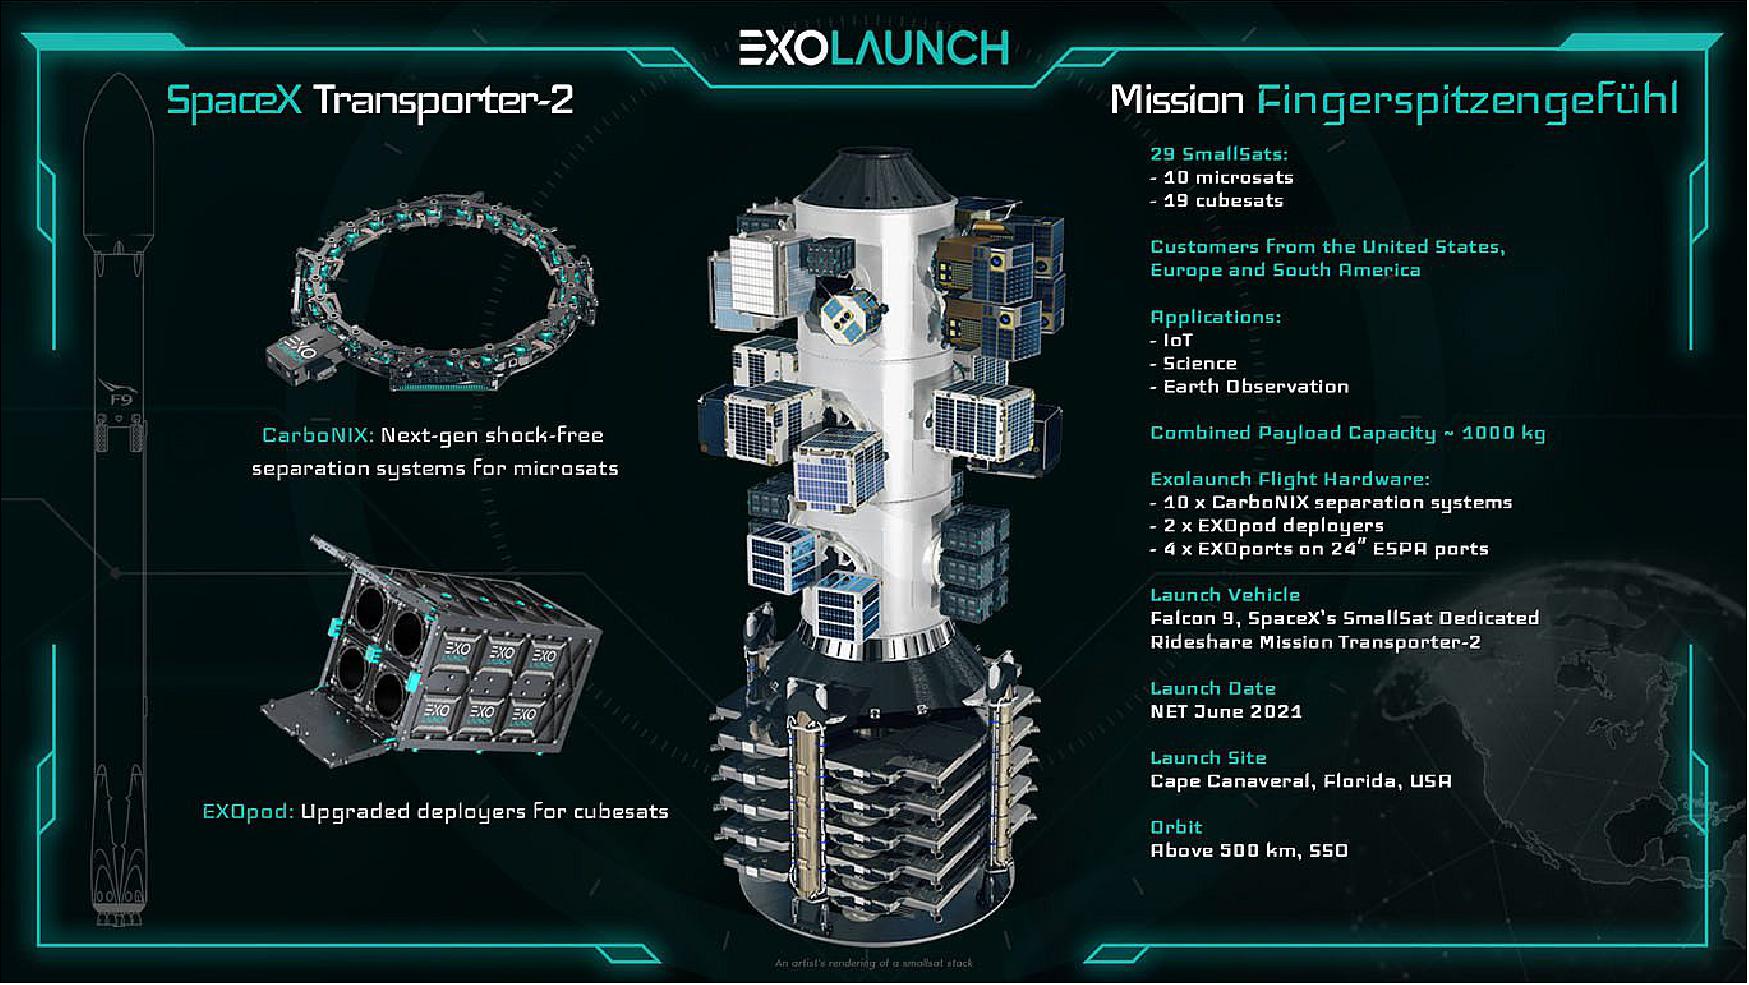 Figure 9: Overview of Exolaunch mission payloads and deployment services on the SpaceX Transporter-2 mission (image credit: Exolaunch)